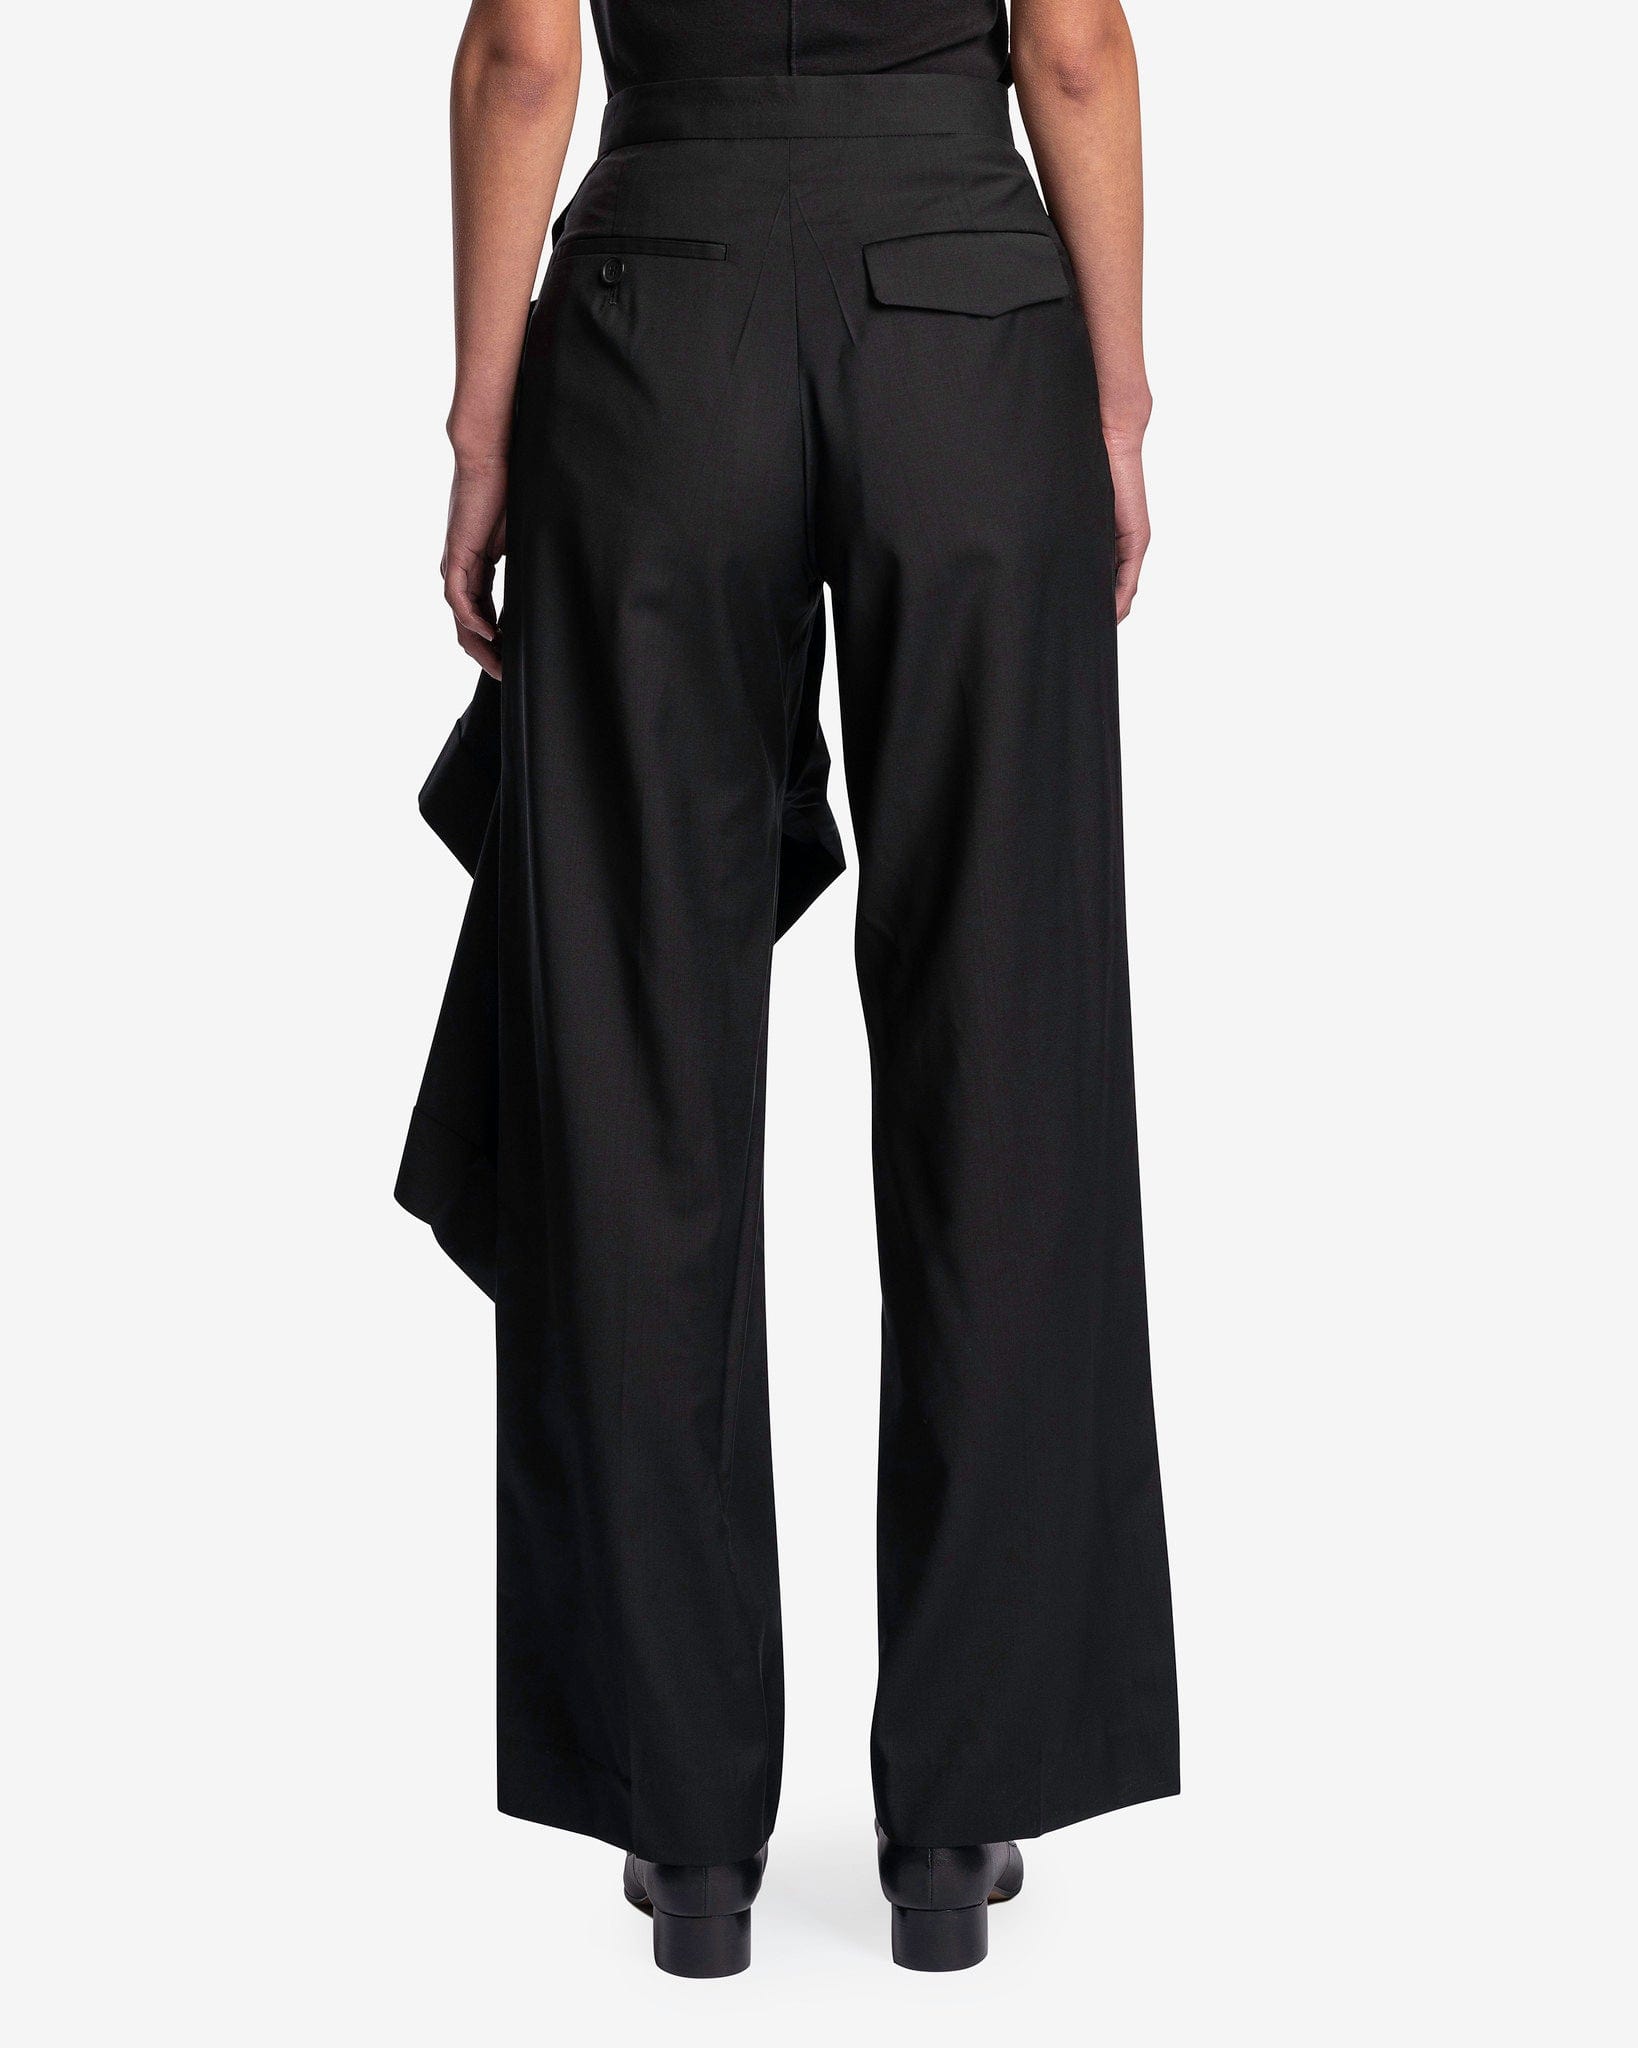 UNDERCOVER women's pants Layered Trousers in Black